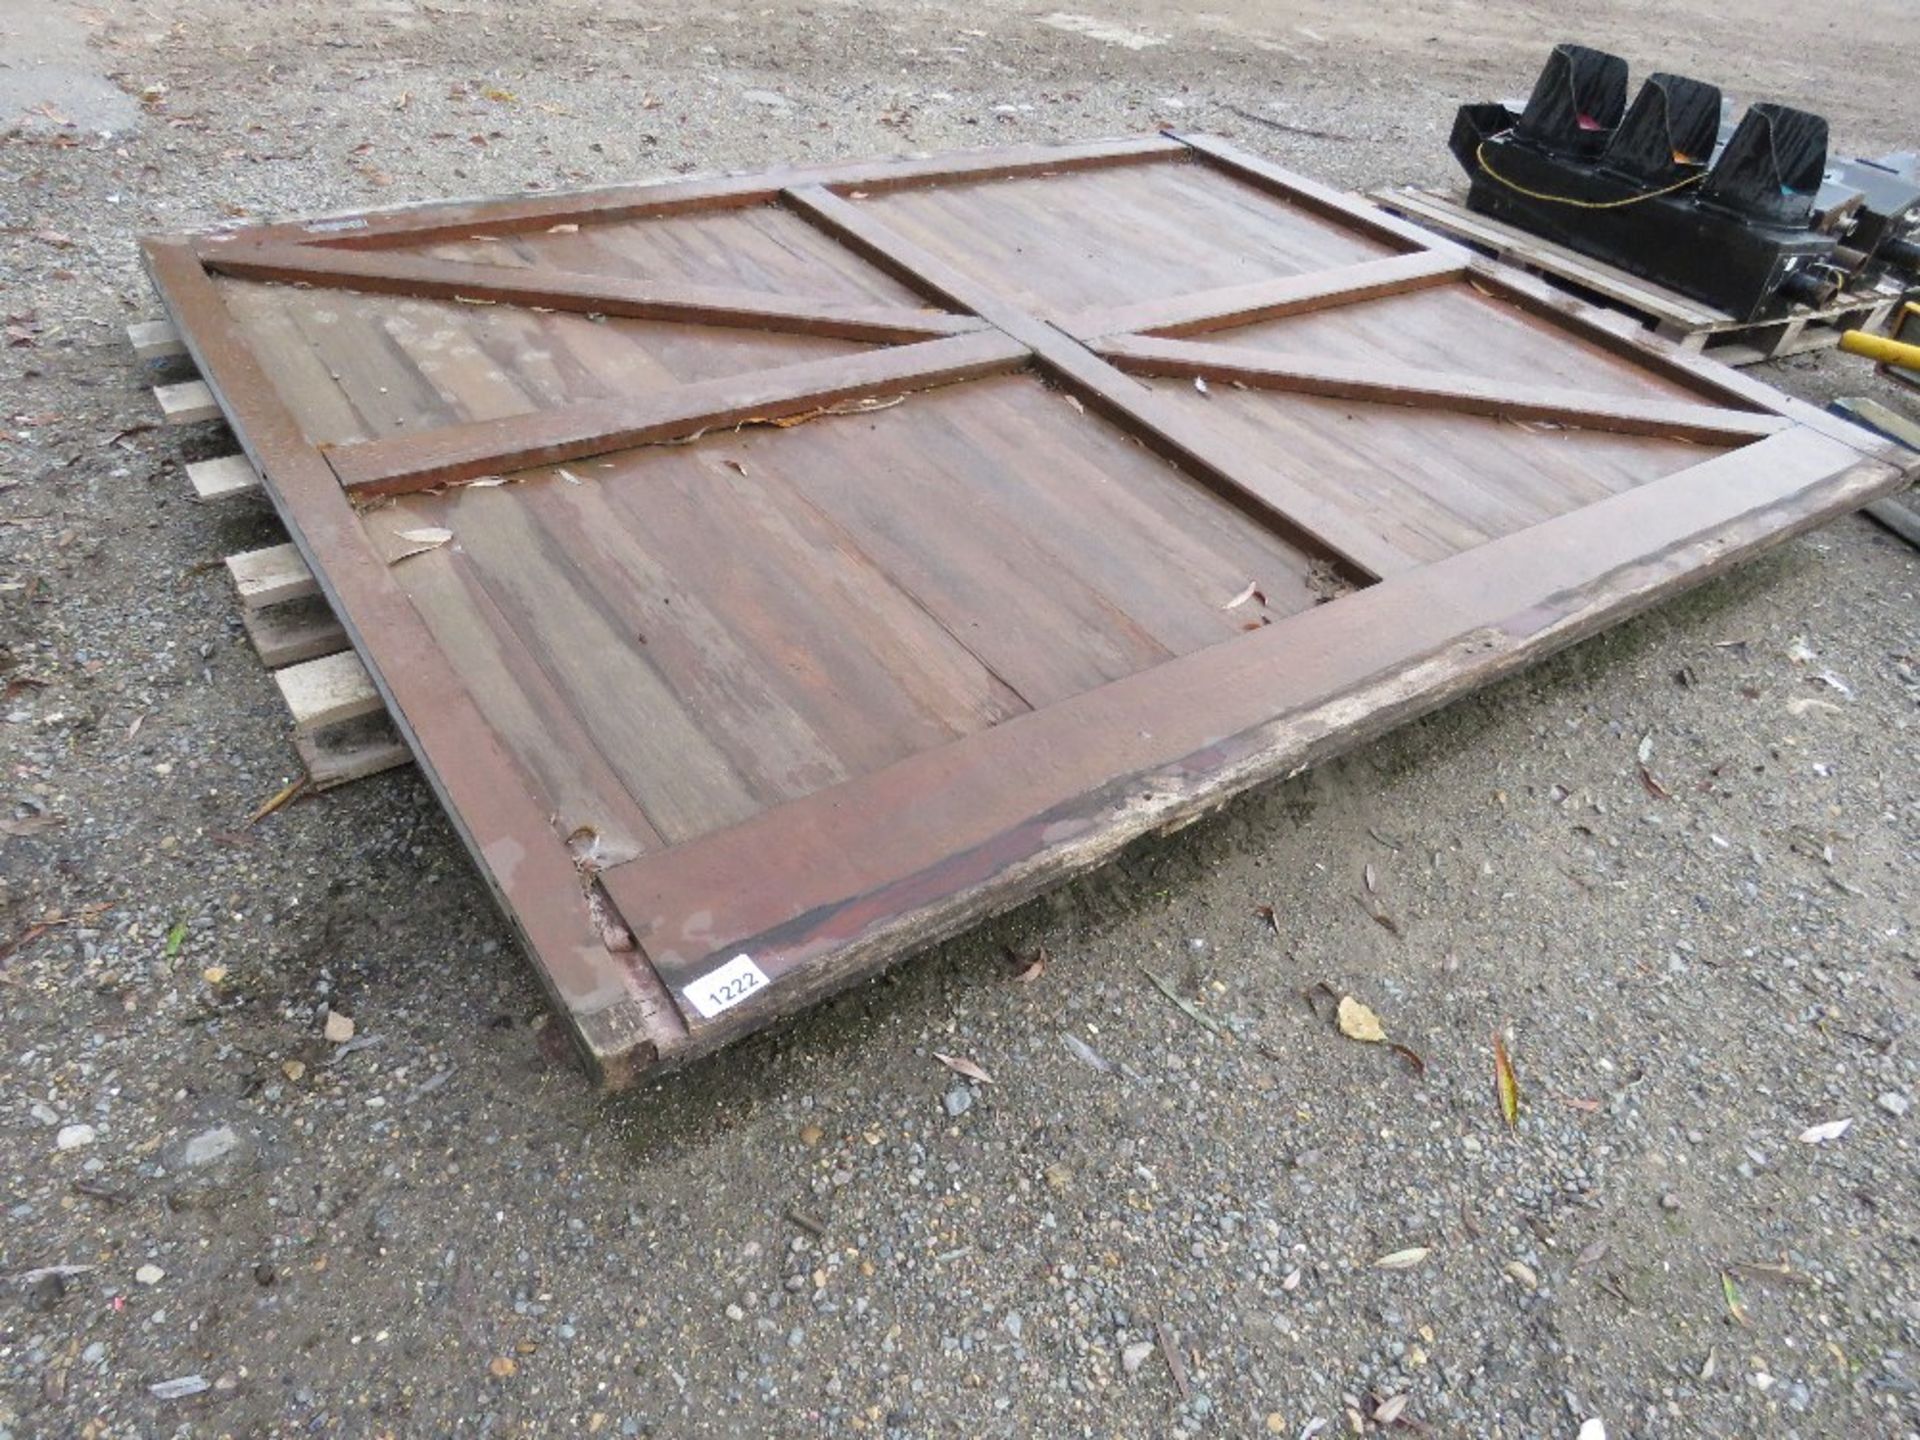 PAIR OF PRE USED WOODEN DRIVEWAY GATES, 8FT WIDE EACH X 6FT HEIGHT APPROX.